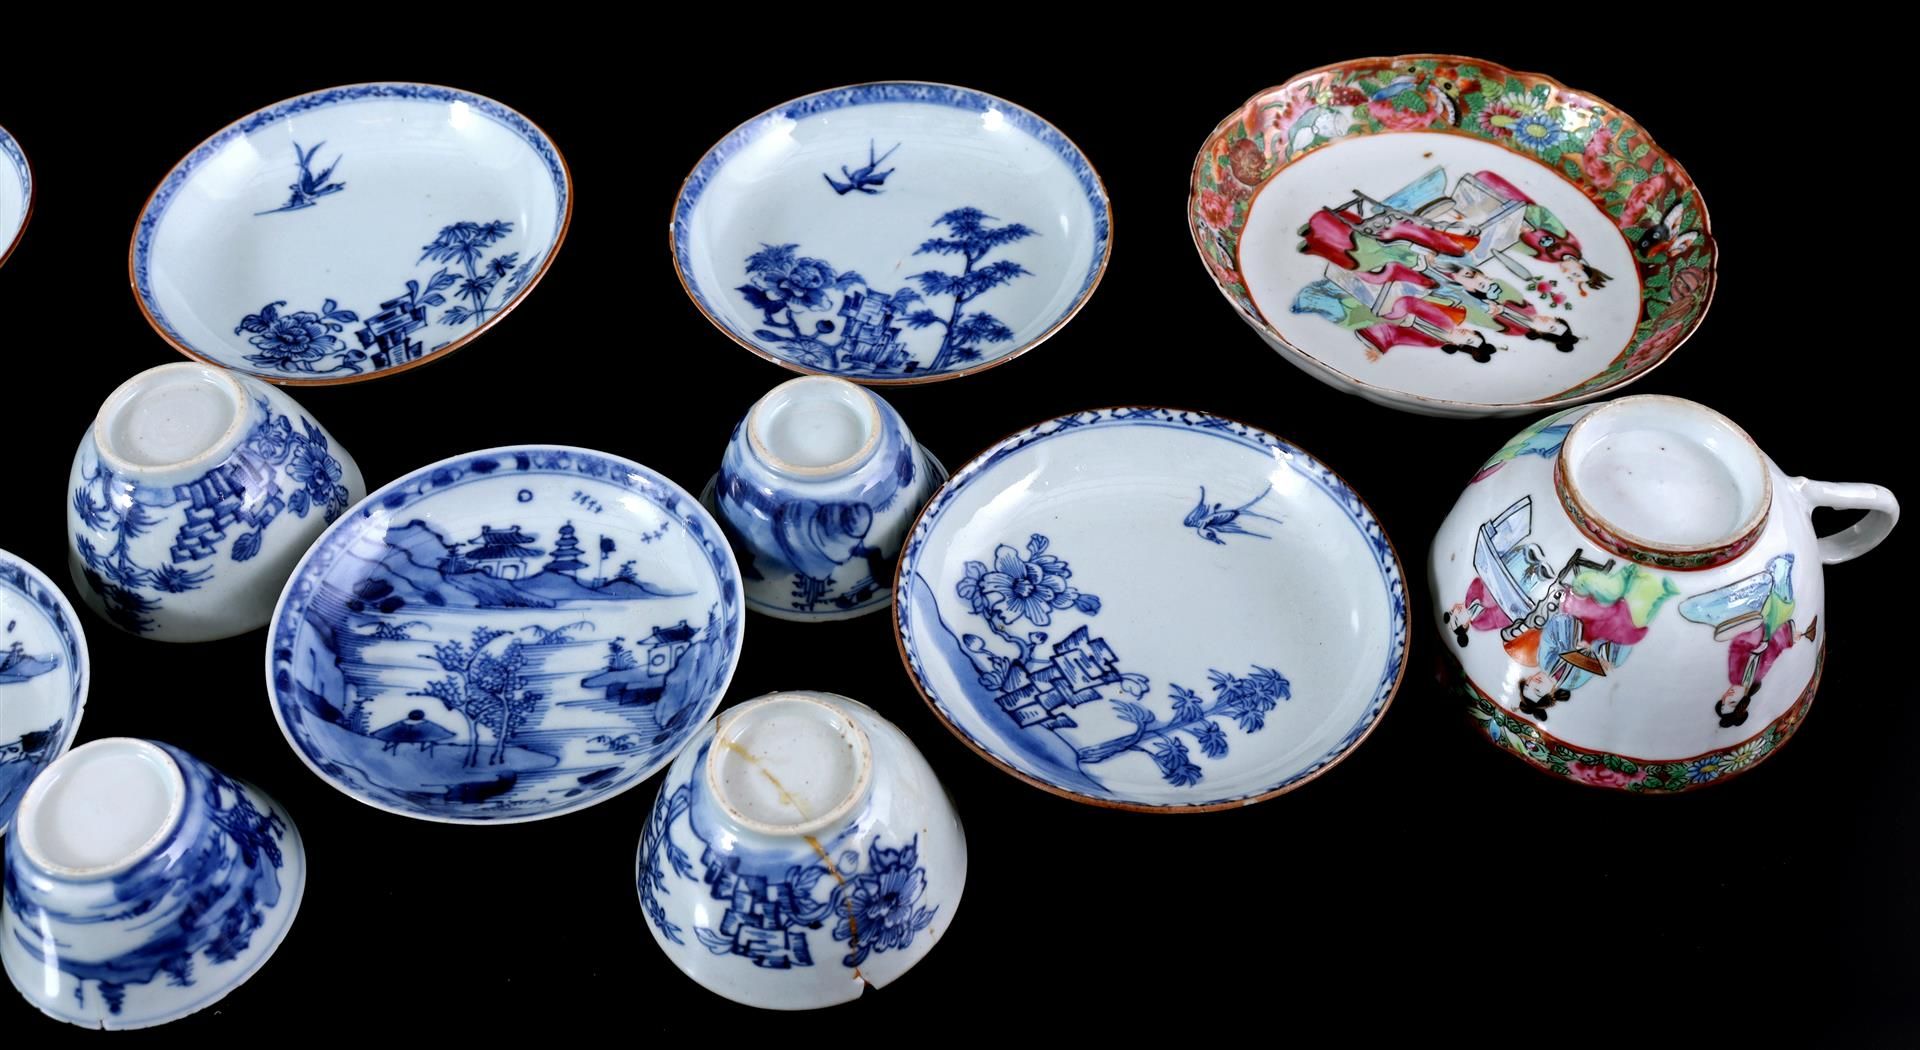 Lot of porcelain bowls and saucers with blue decor - Image 3 of 4